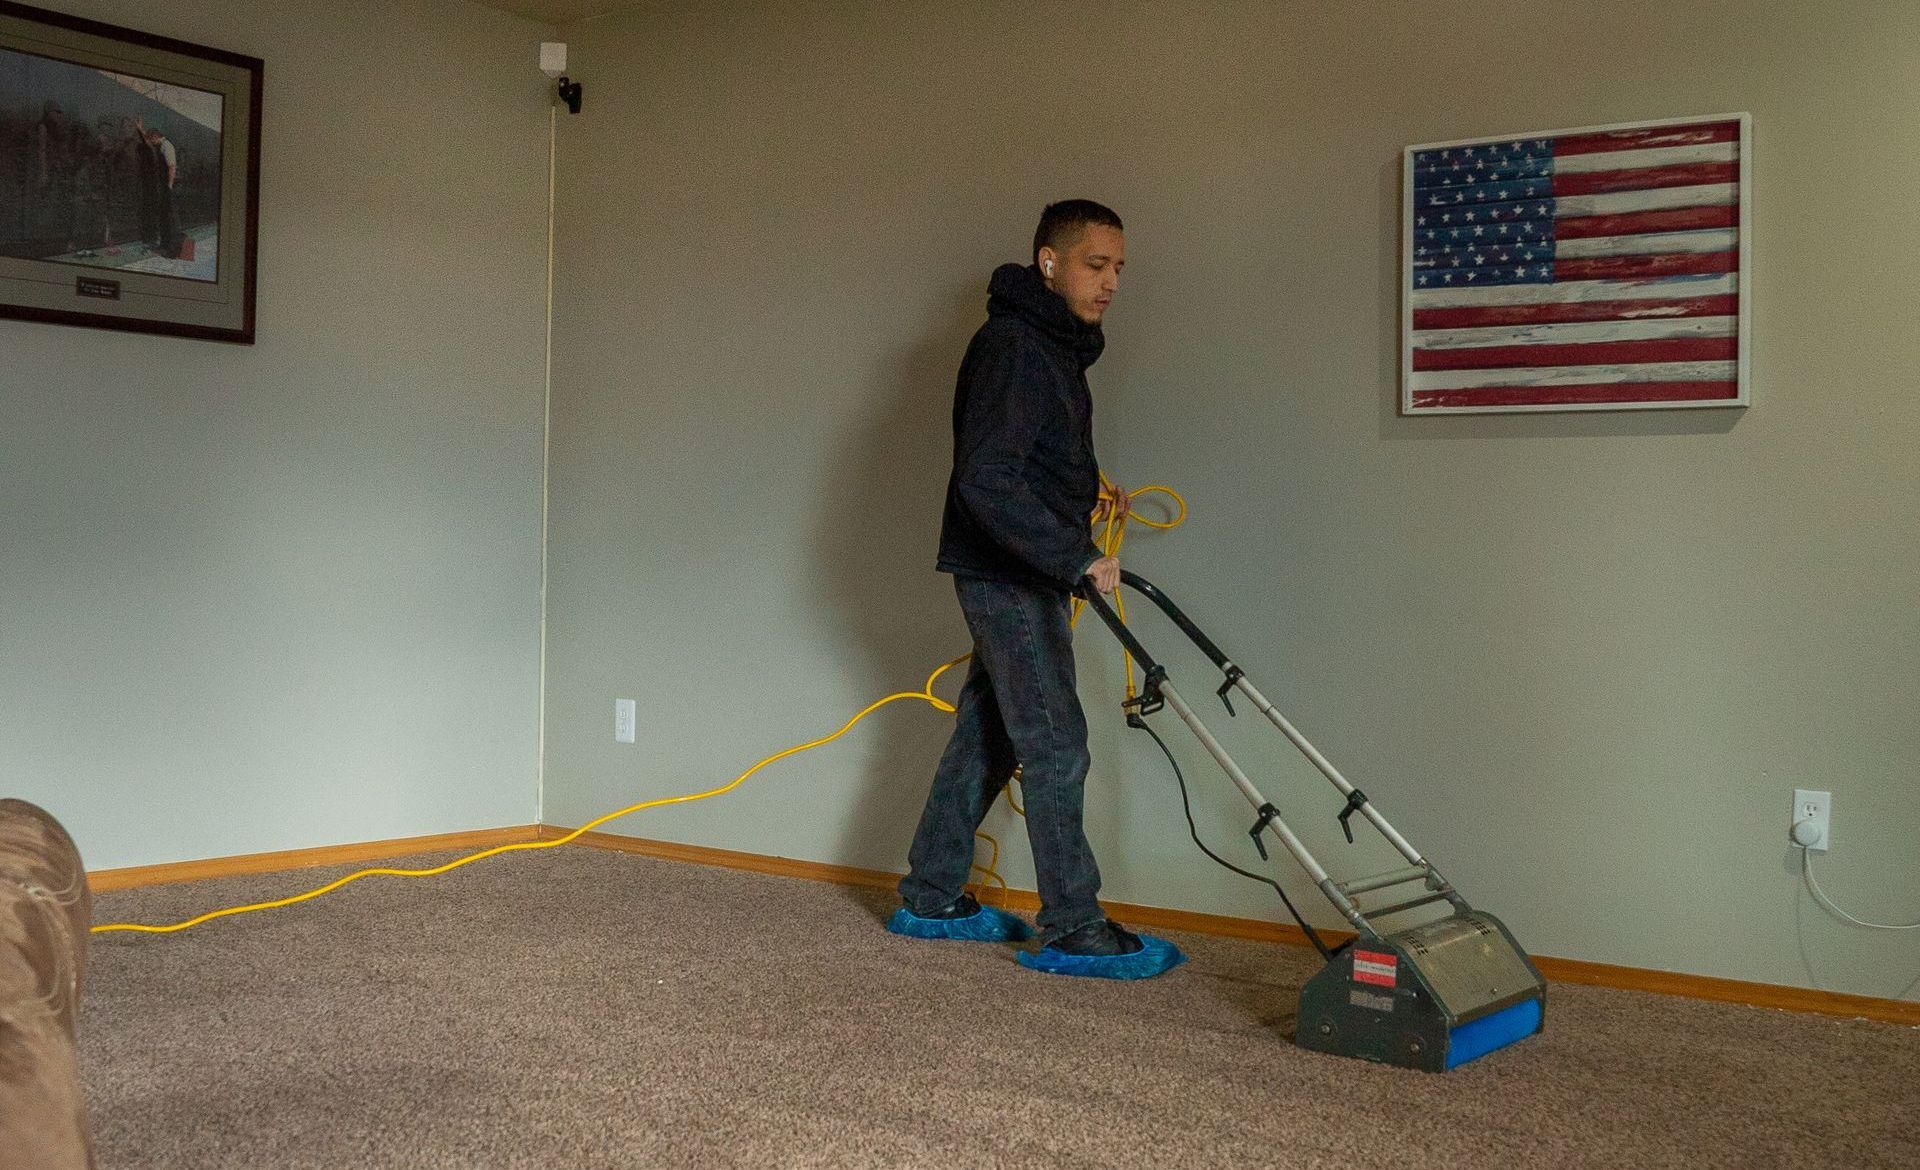 Residential Carpet Cleaning Maple Valley, WA